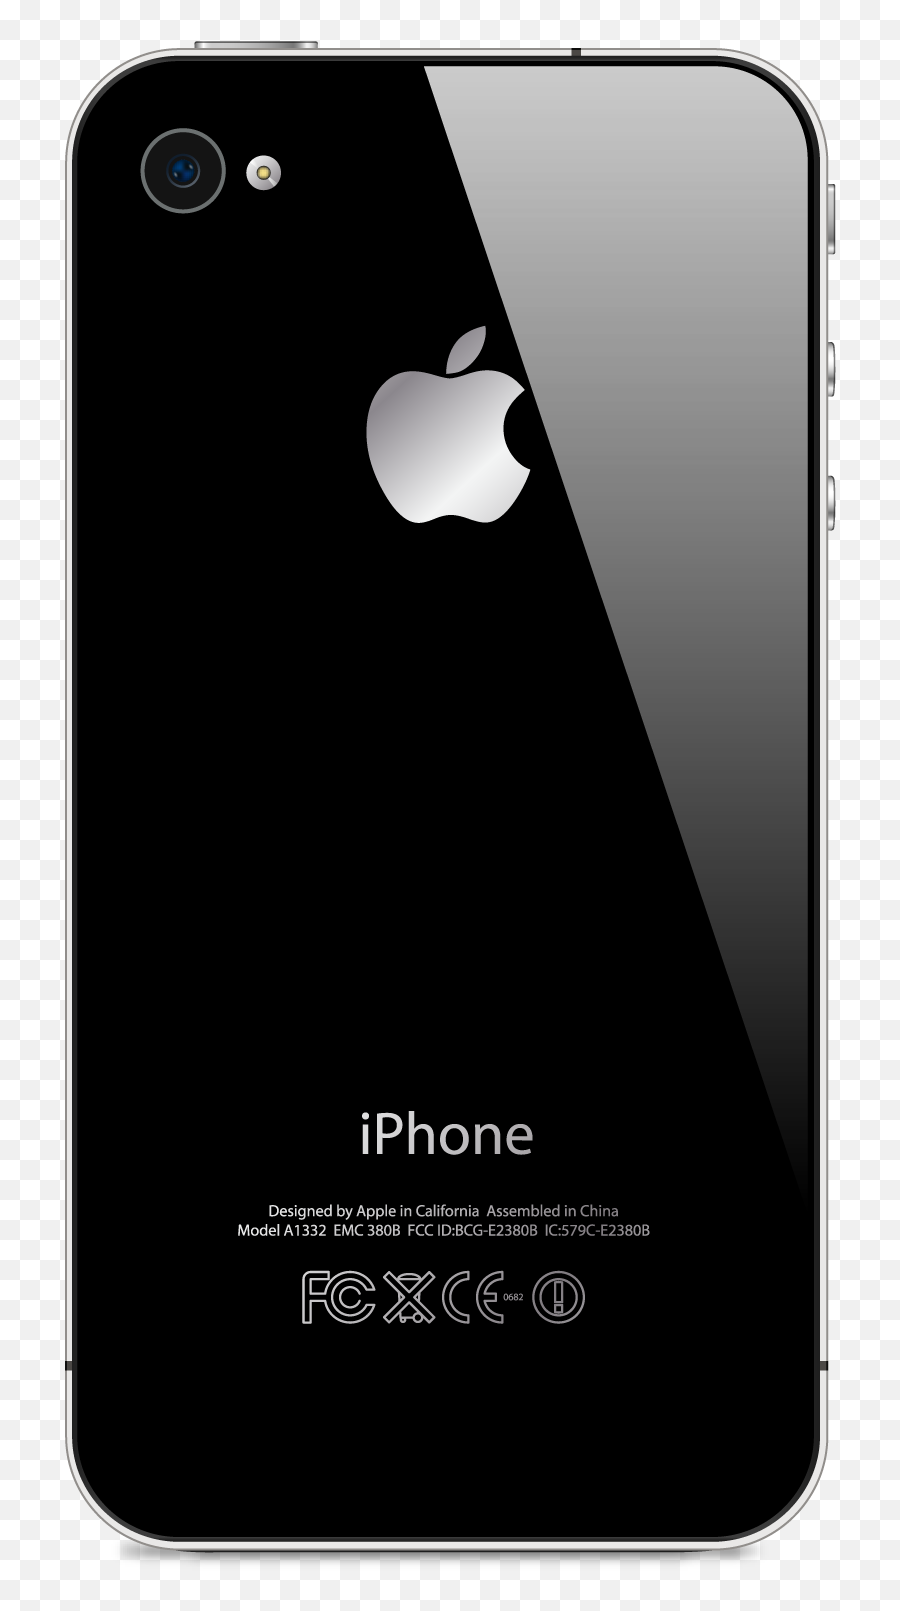 Apple Iphone Png Transparent Free Images Only - Iphone Png Back Side,Apples Transparent Background